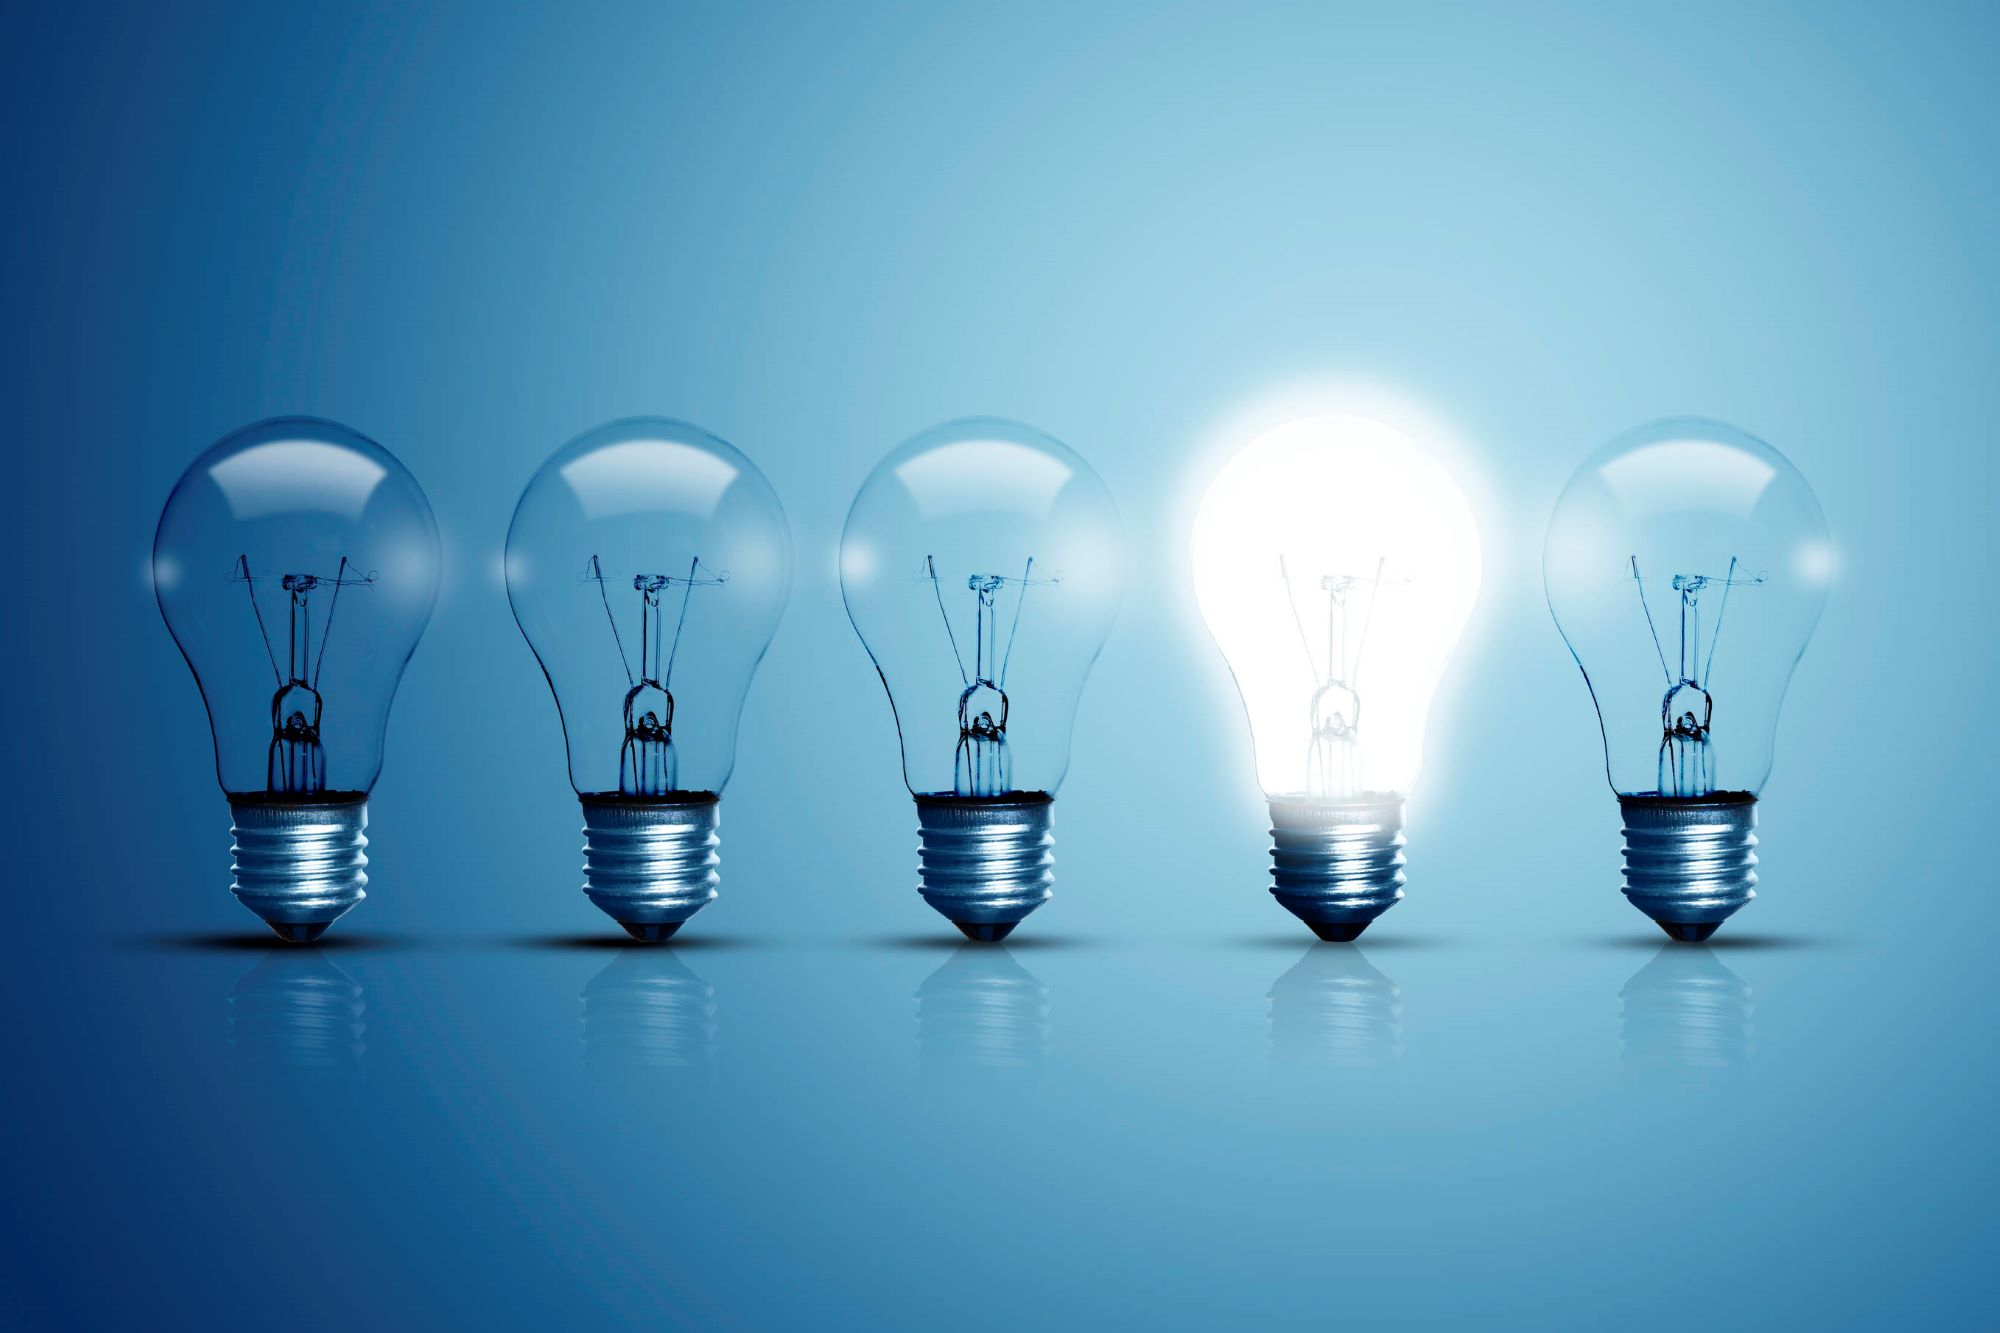 Row of light bulbs on a blue background and one light bulb glowing